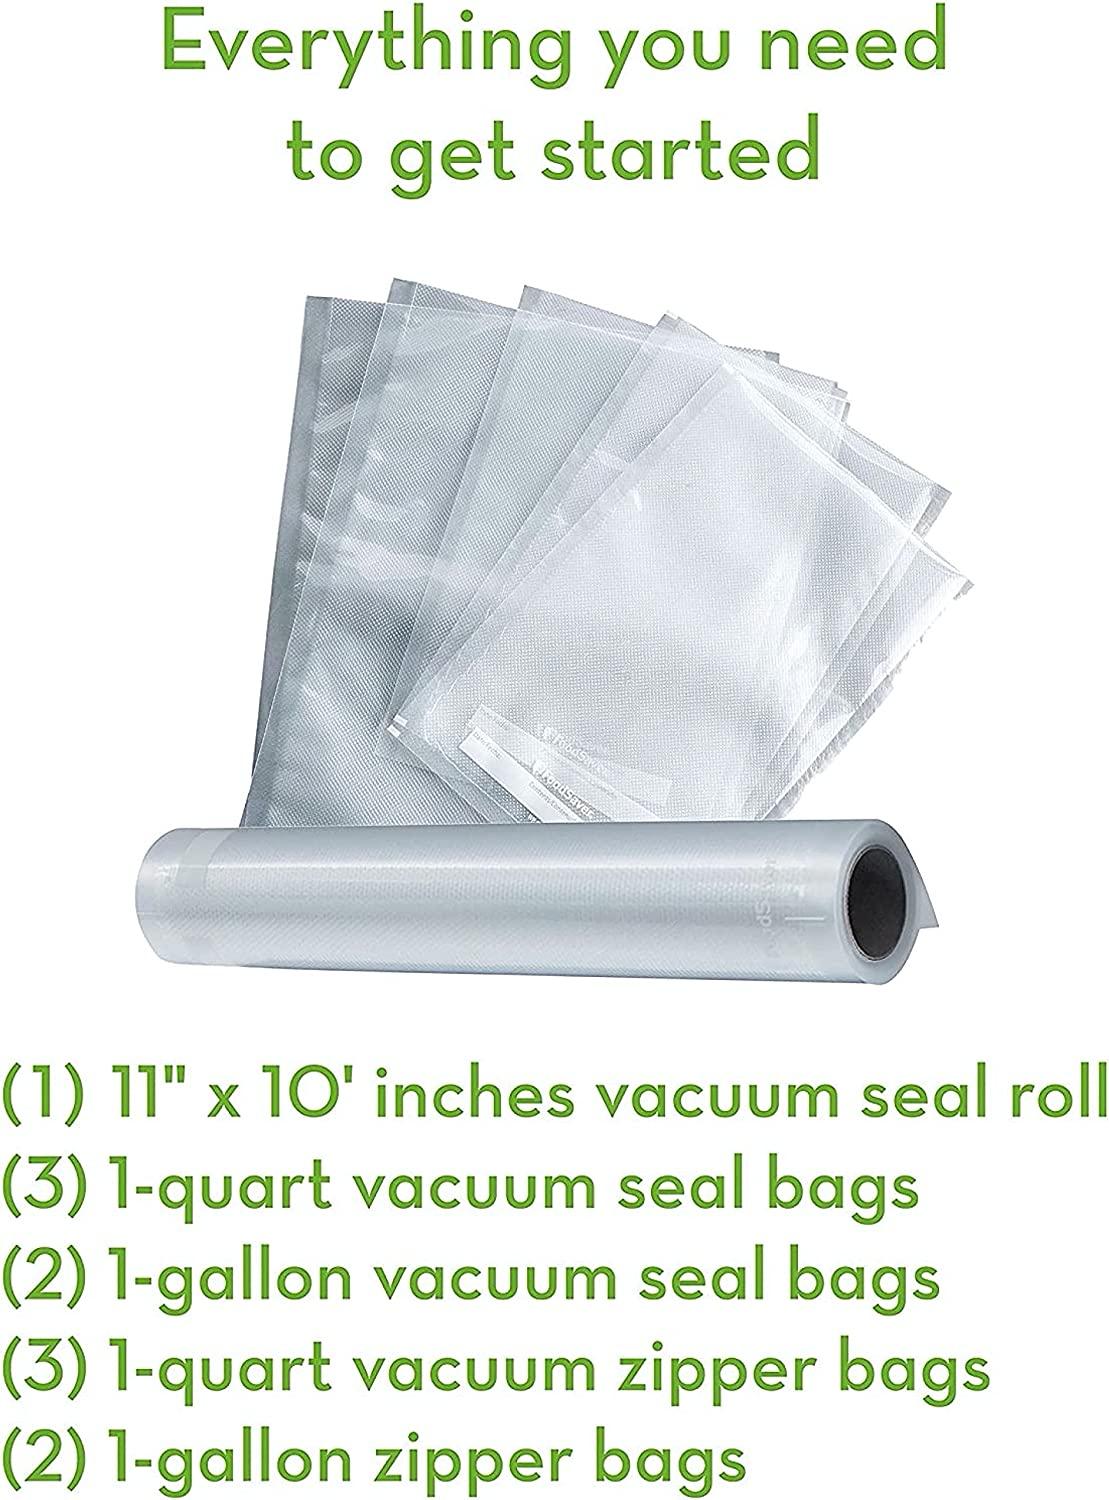 Is it possible to use regular freezer zipper bags (quart and gallon size)  with a handheld vacuum sealer like foodsaver? The special vacuum bags cost  way more than the zipper bags. 